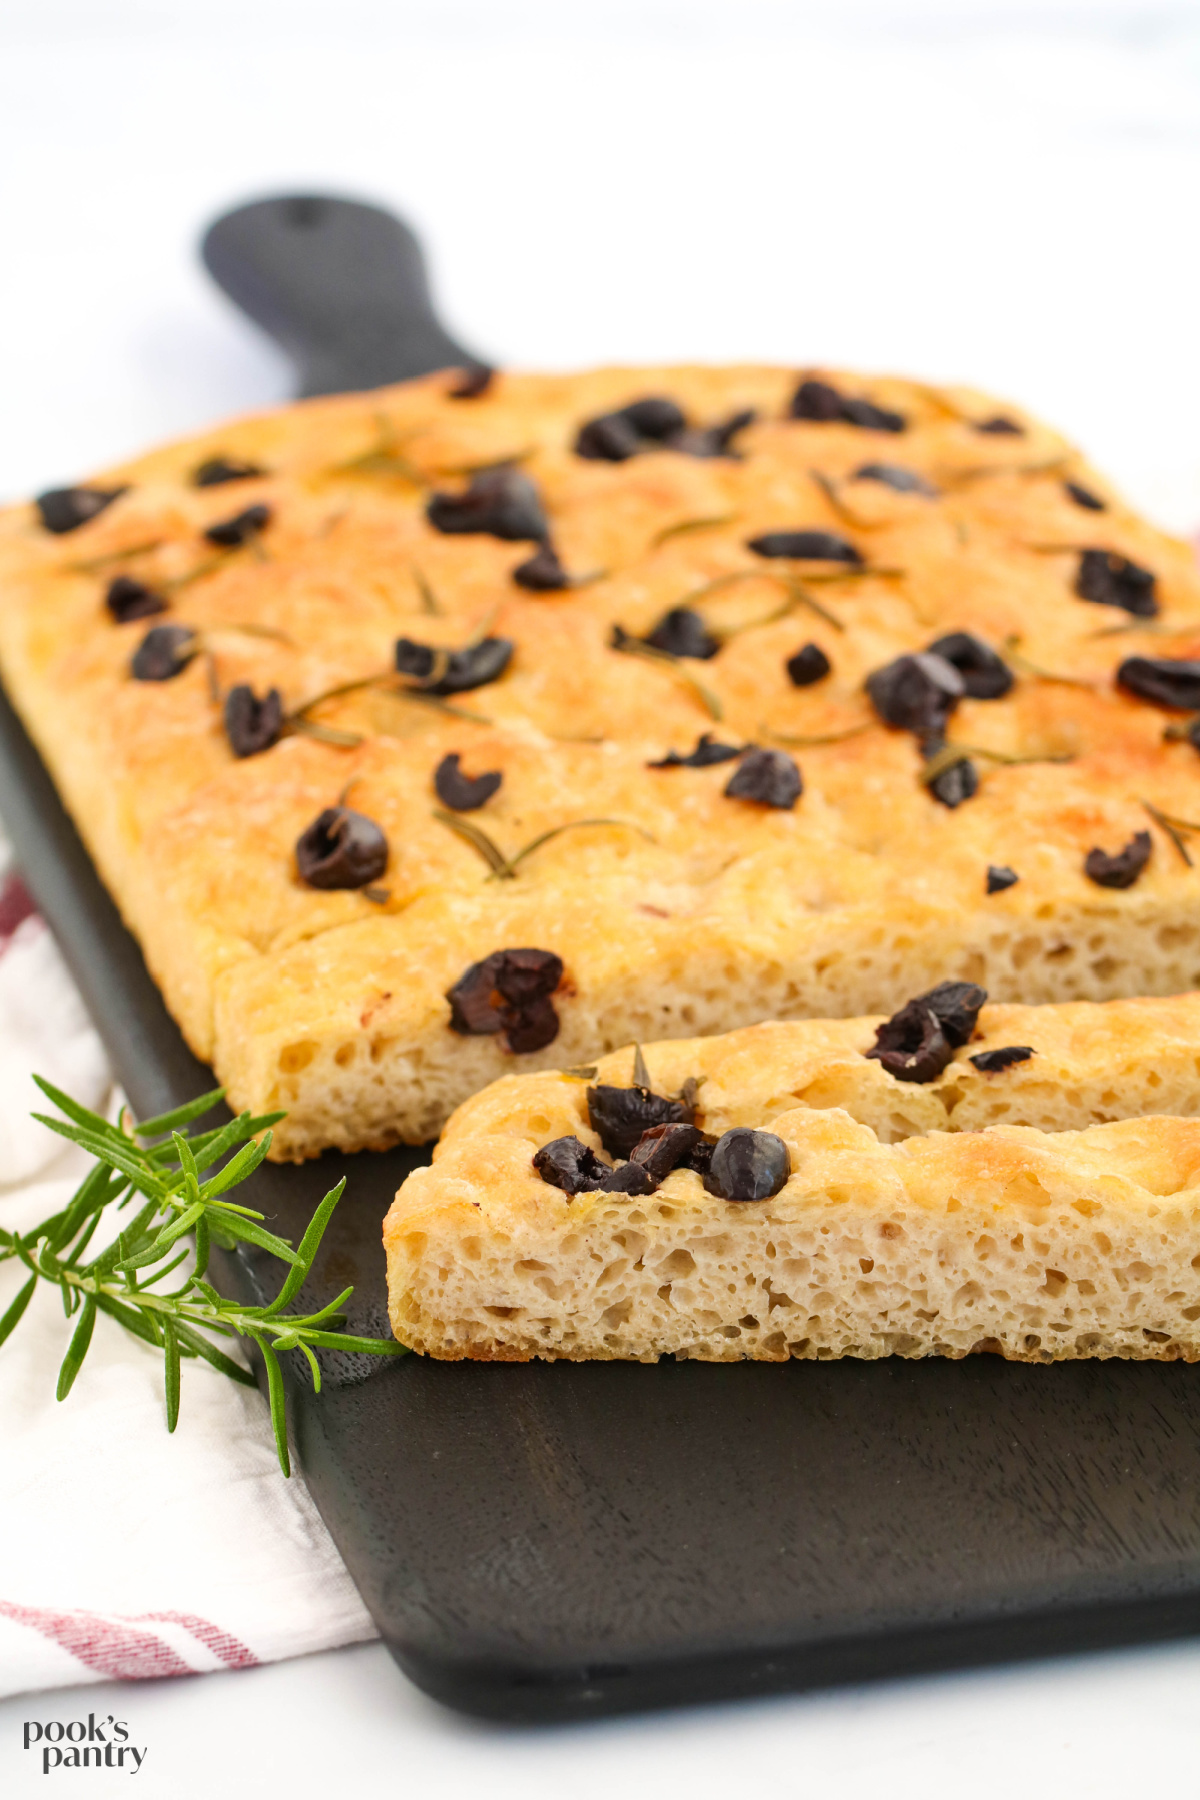 Rosemary and black olive focaccia on black board with rosemary sprigs on the side.